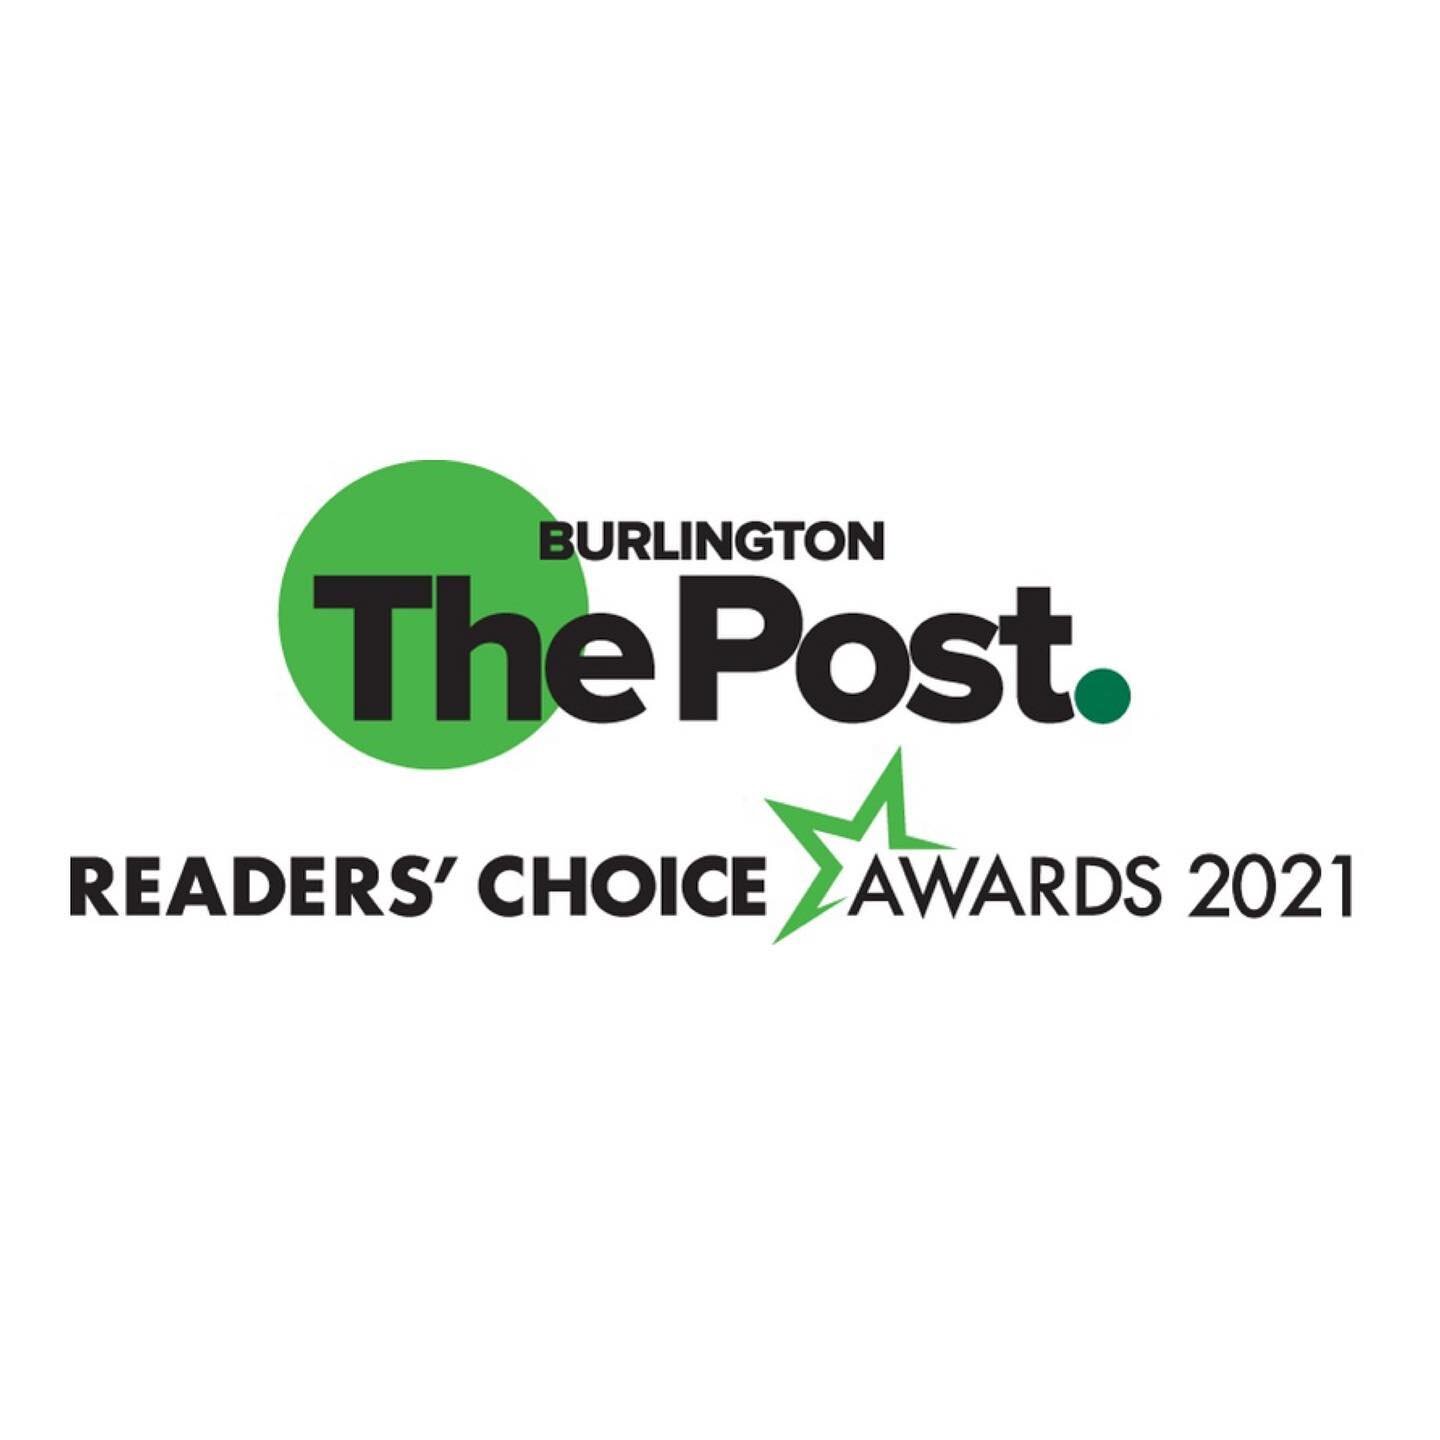 WE VE BEEN NOMINATED! 

Thank You, Thank YOU, THANK YOU!!

Link to vote 👇🏽

https://www.insidehalton.com/readerschoice-burlington/business/waters-edge-salon-and-spa